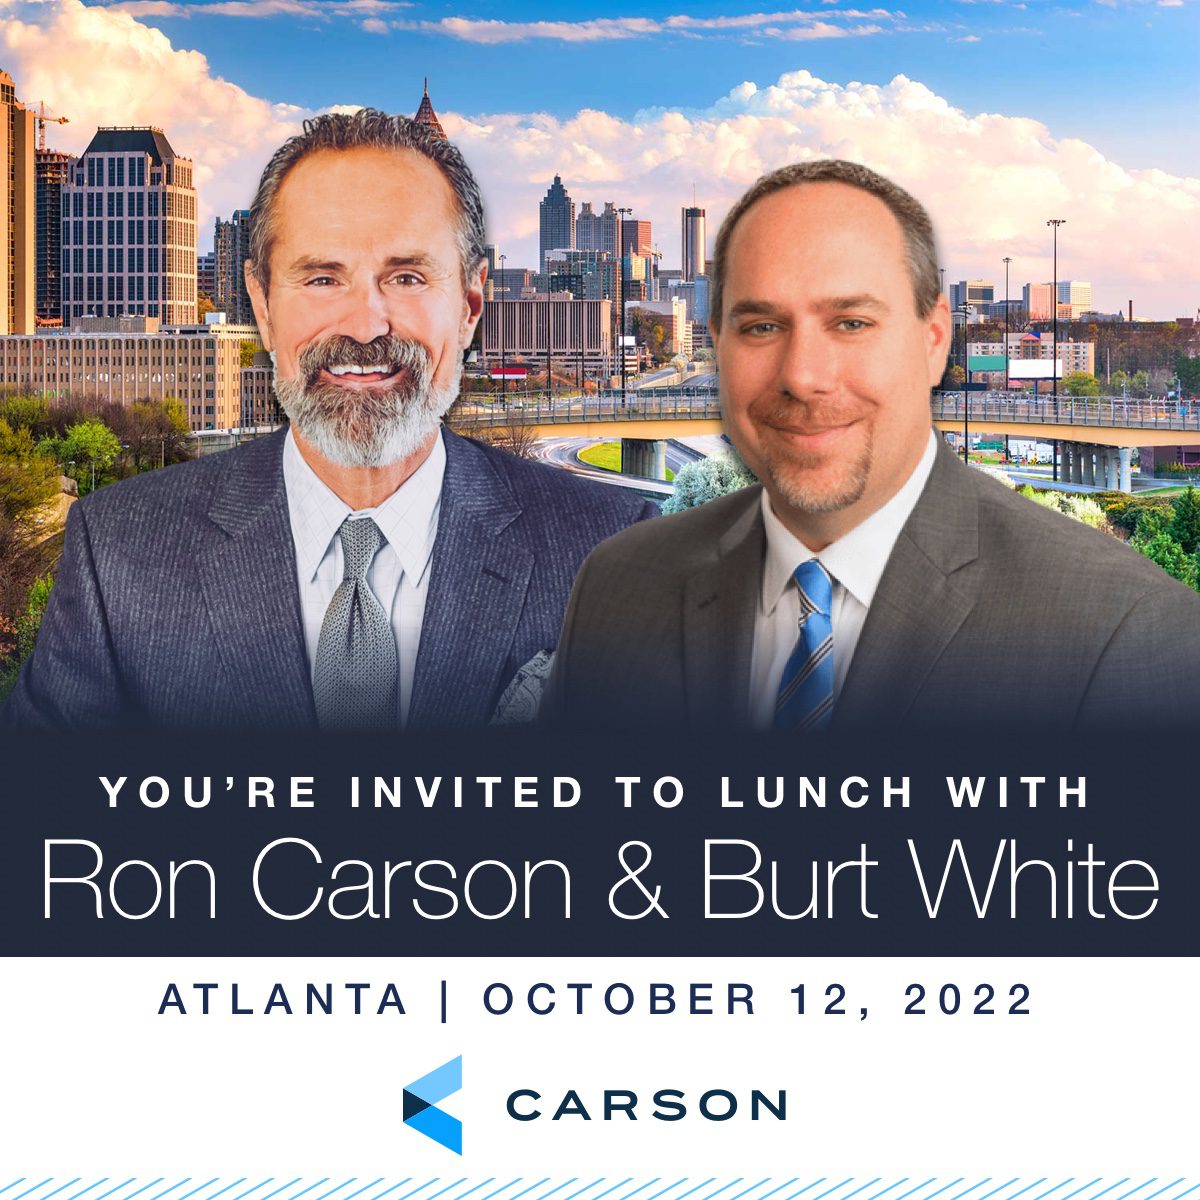 Join Ron Carson and Burt White for Lunch in Atlanta